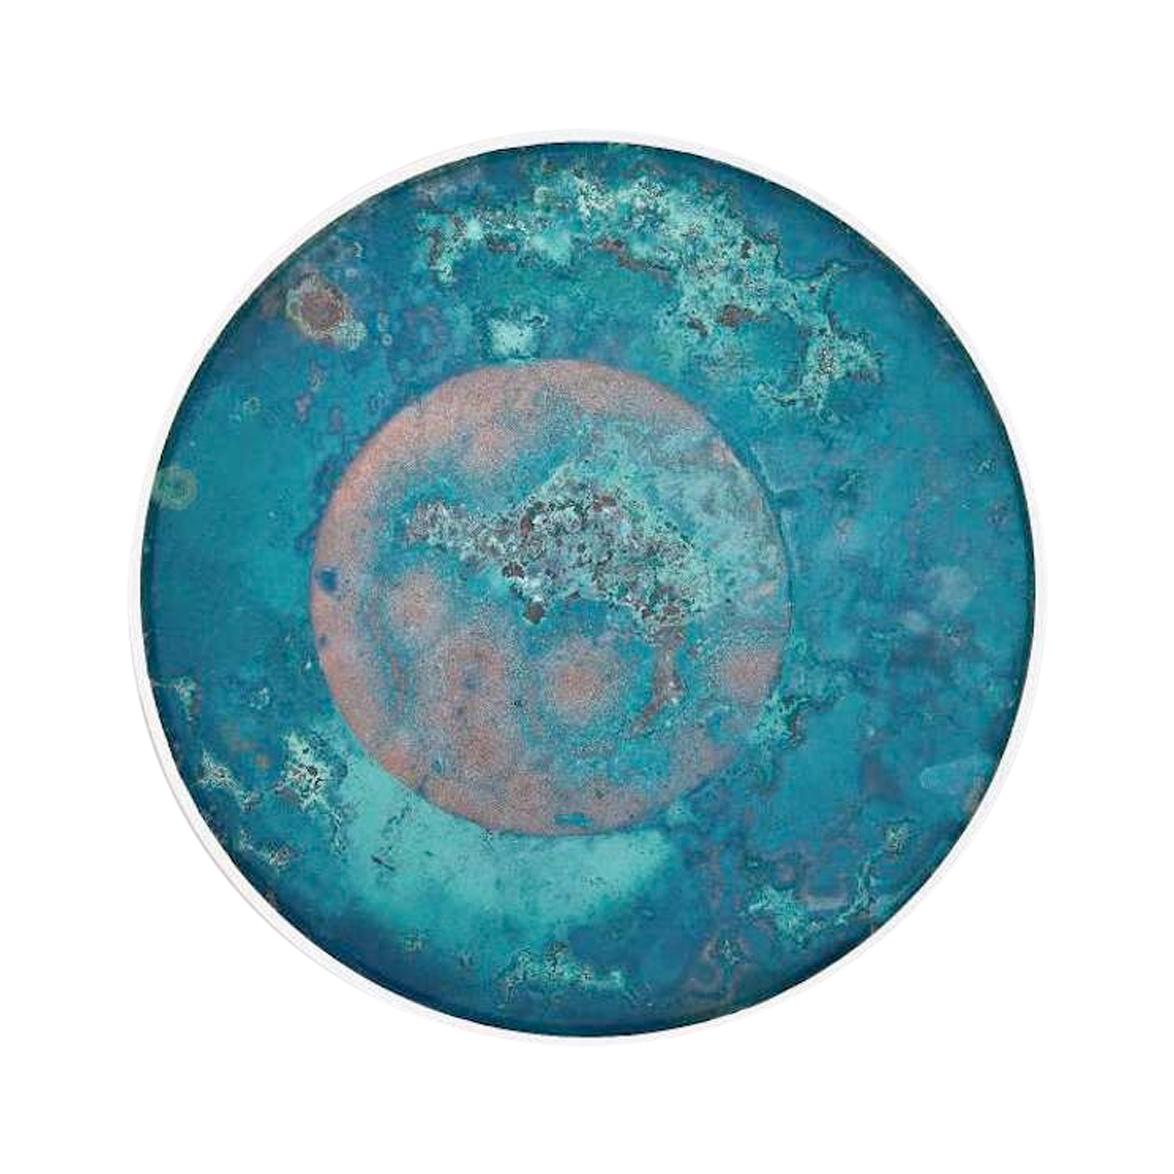 Copper & Stainless Steel Decor/ Plate, 'Star Dust 3.0 #3' by Daishi Luo For Sale